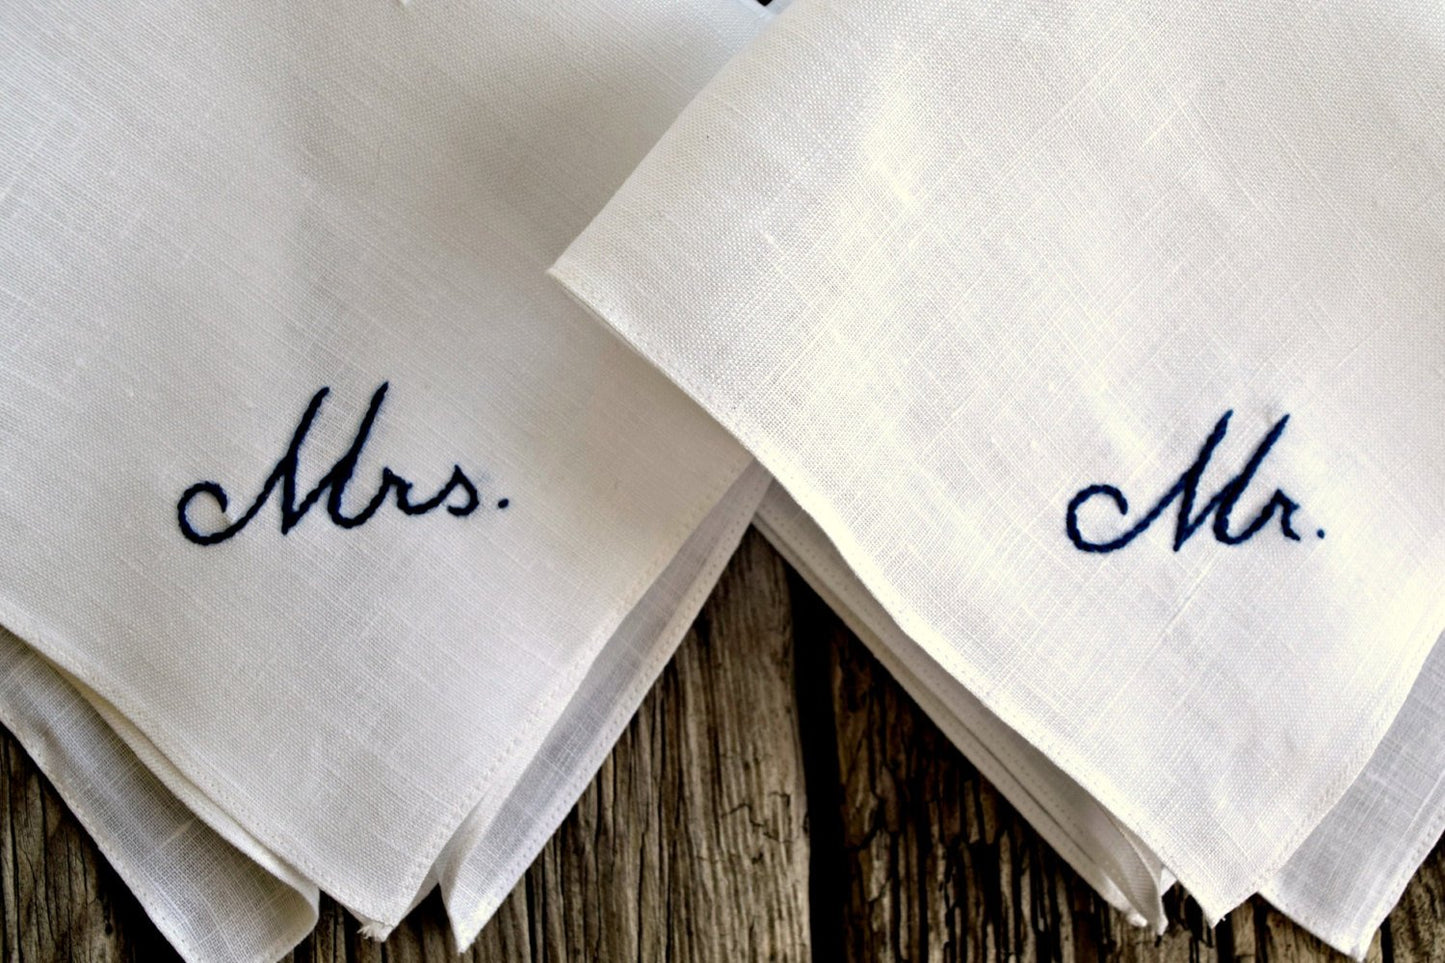 Close up of two handkerchiefs, one hand embroidered Mr. and one Mrs.